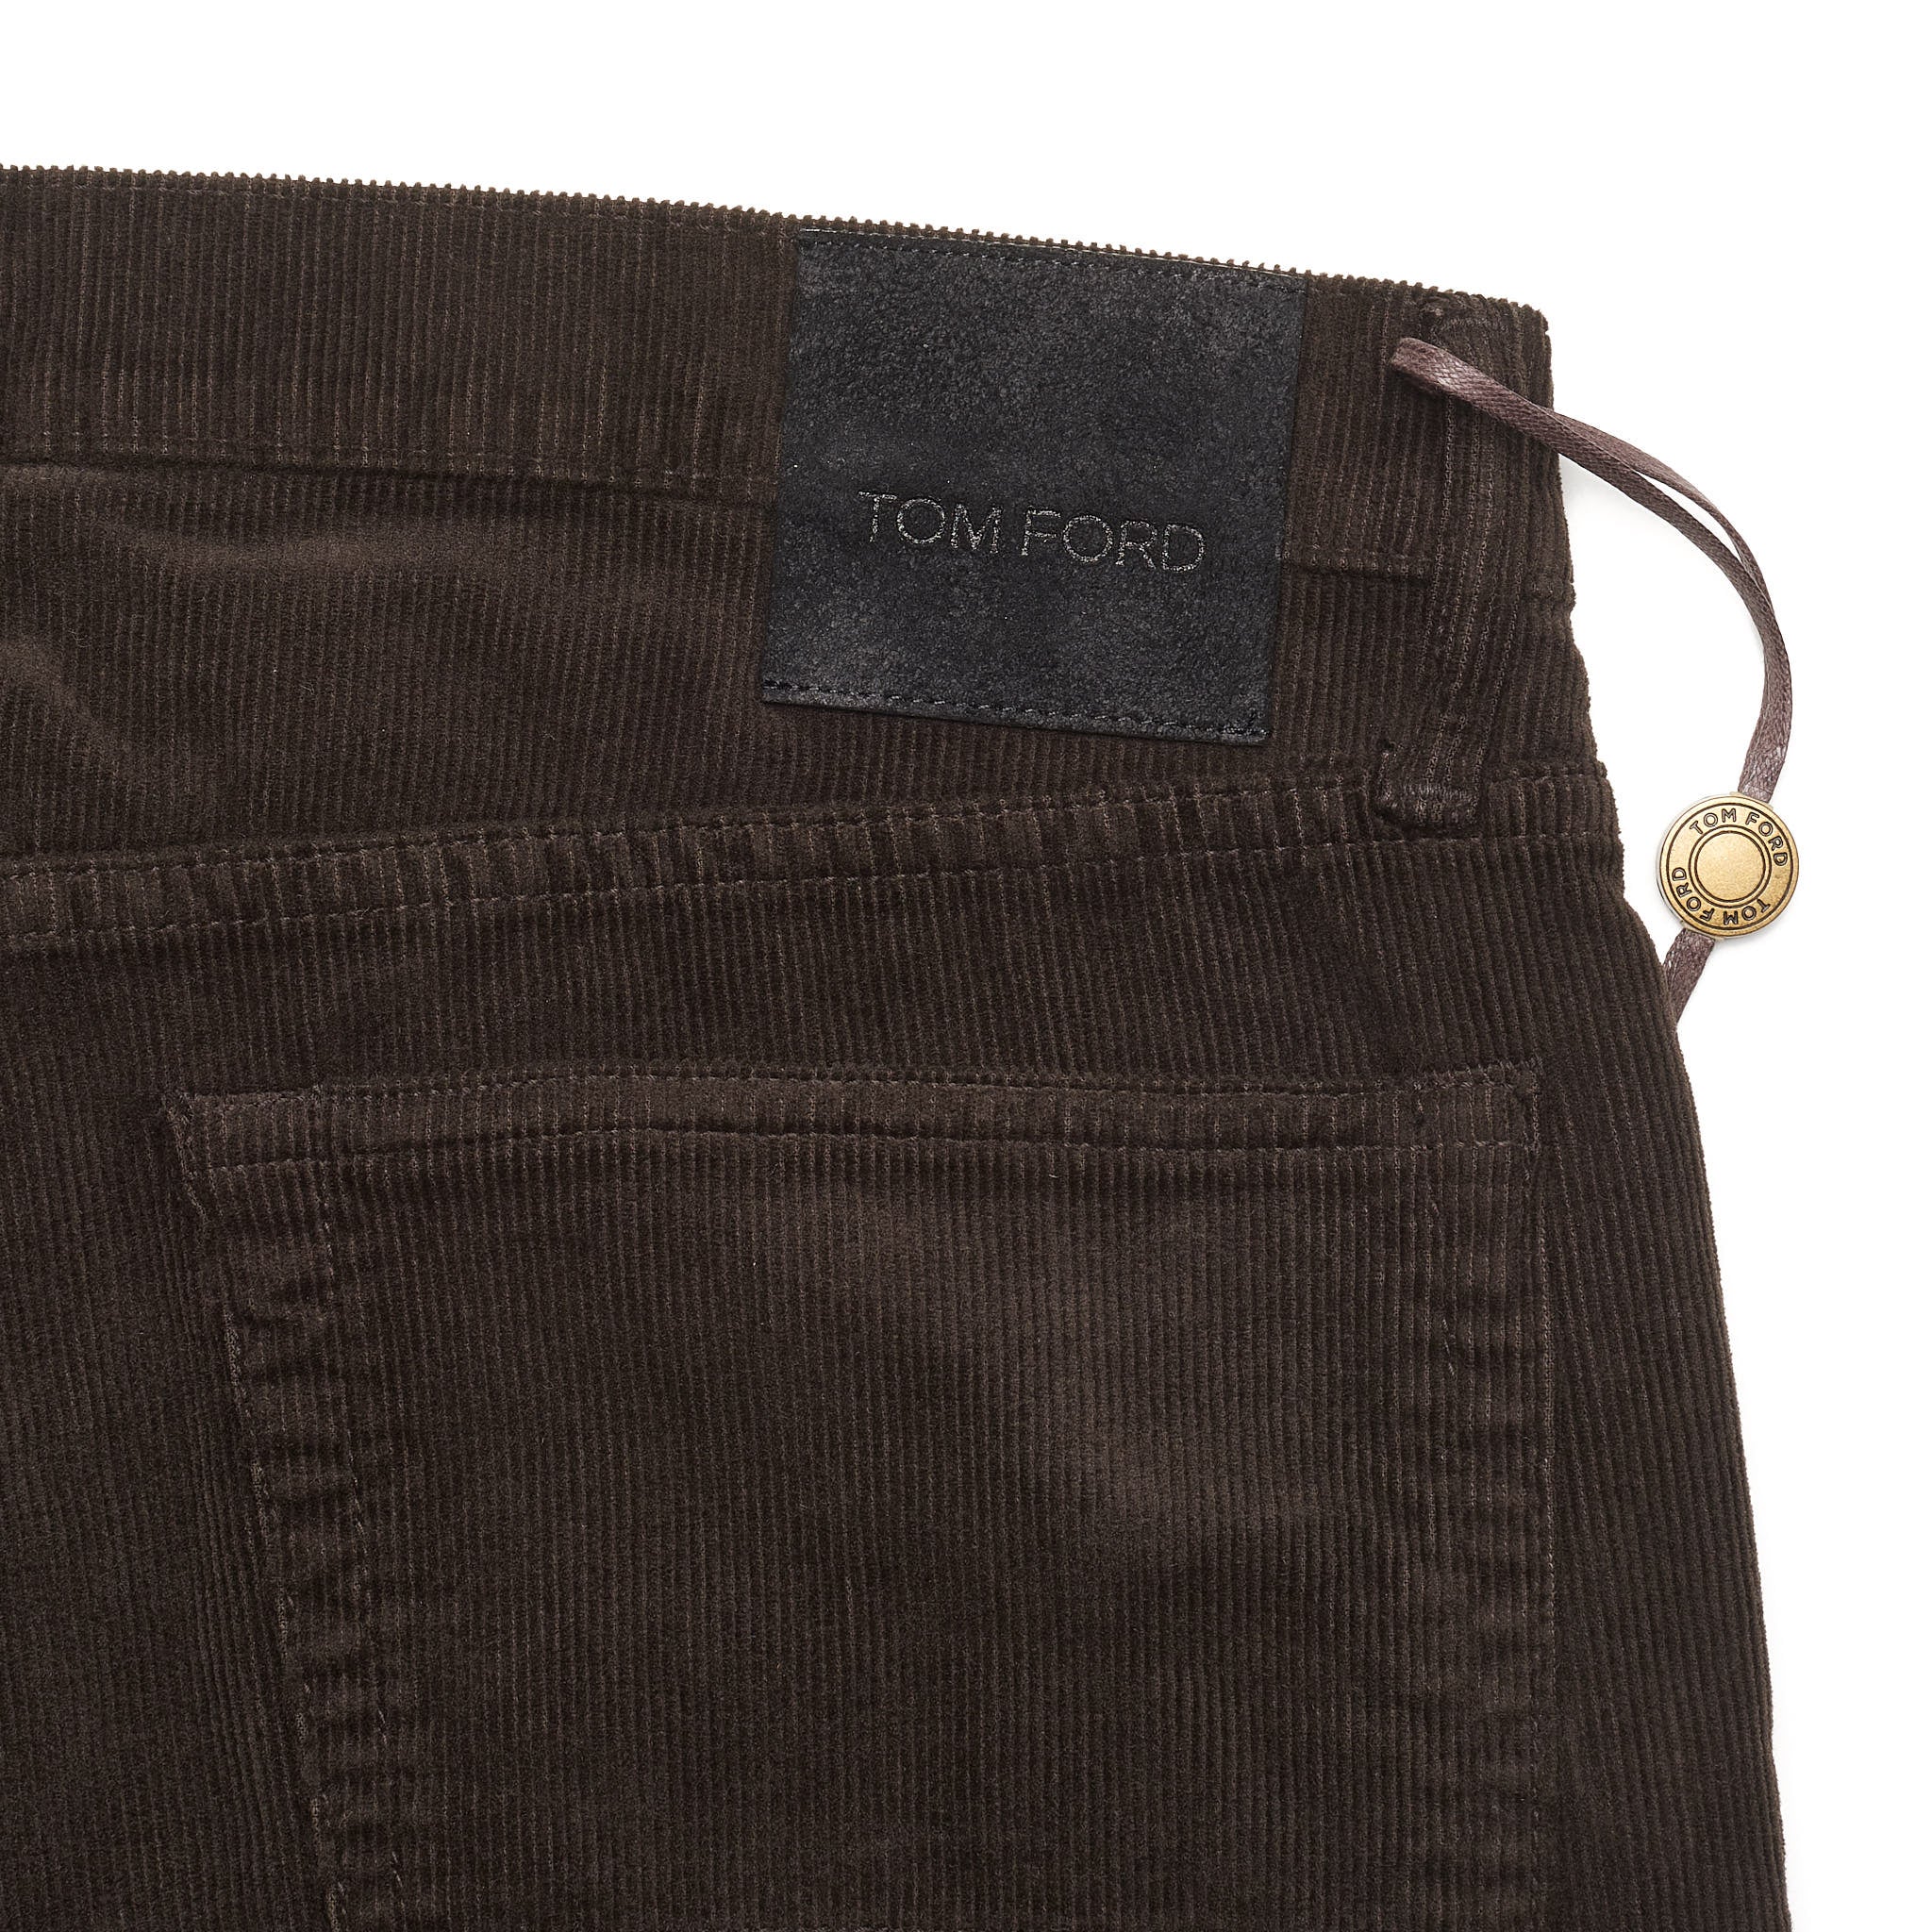 TOM FORD Dark Brown Cotton Corduroy Stretch Jeans Pants NEW Slim Fit USA Made